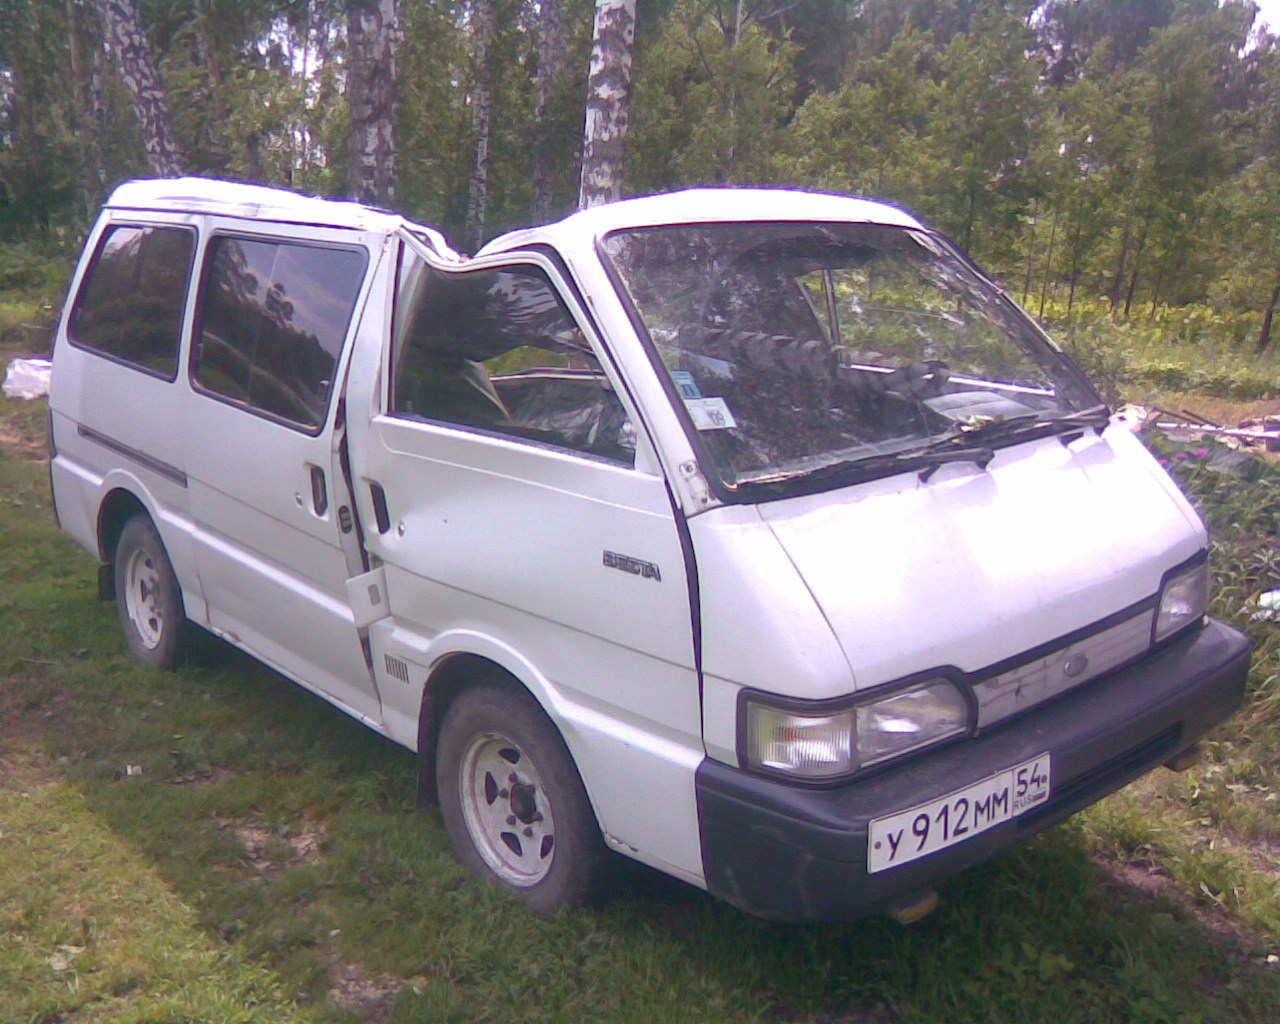 Kia besta diesel. Best photos and information of modification.